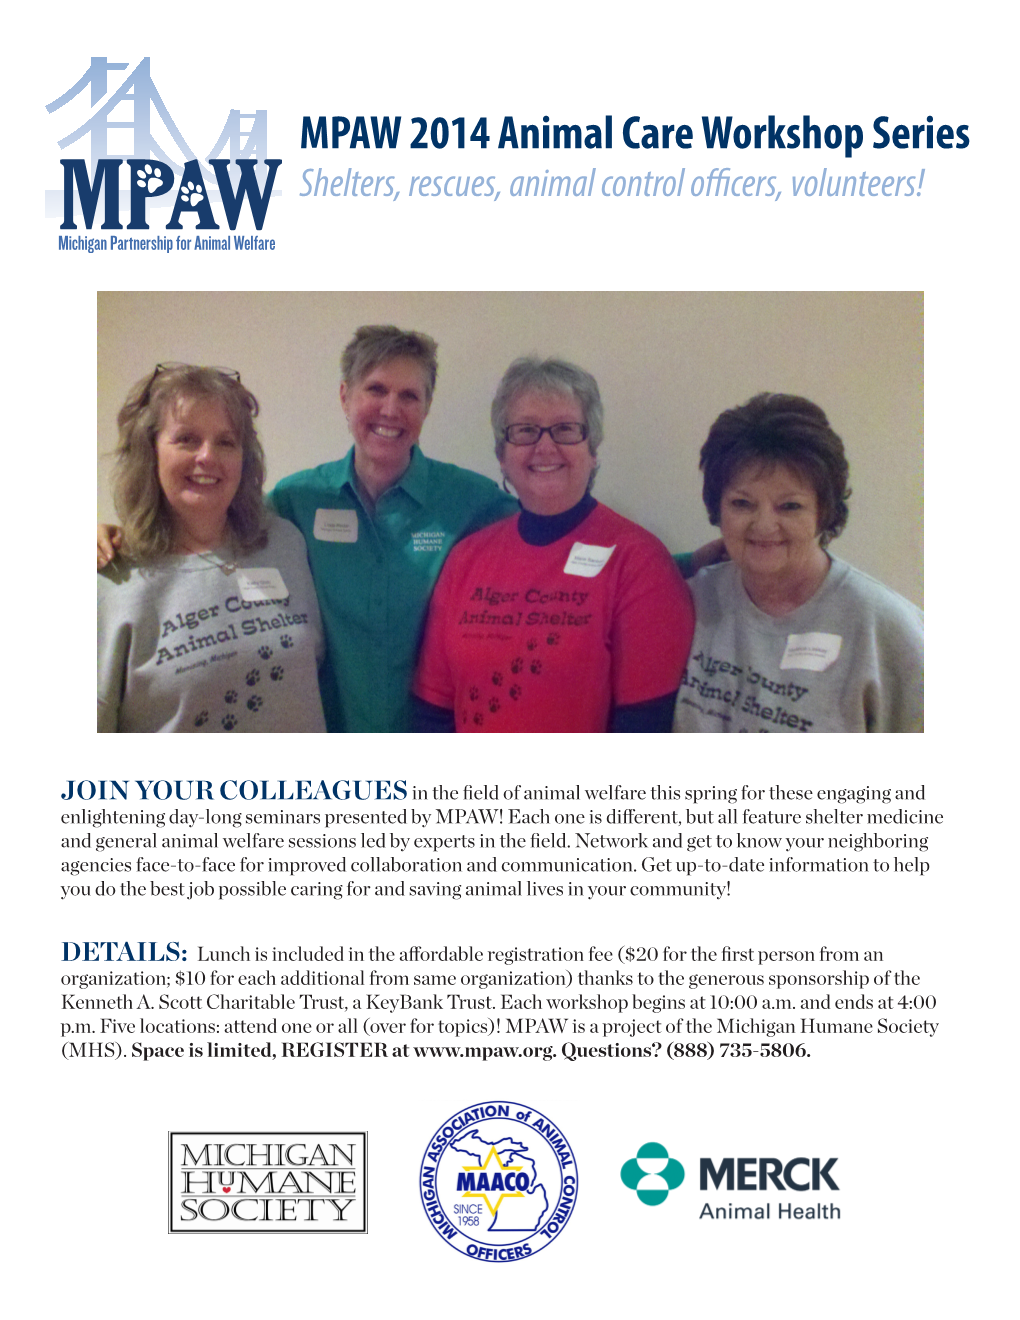 MPAW 2014 Animal Care Workshop Series Shelters, Rescues, Animal Control Officers, Volunteers!